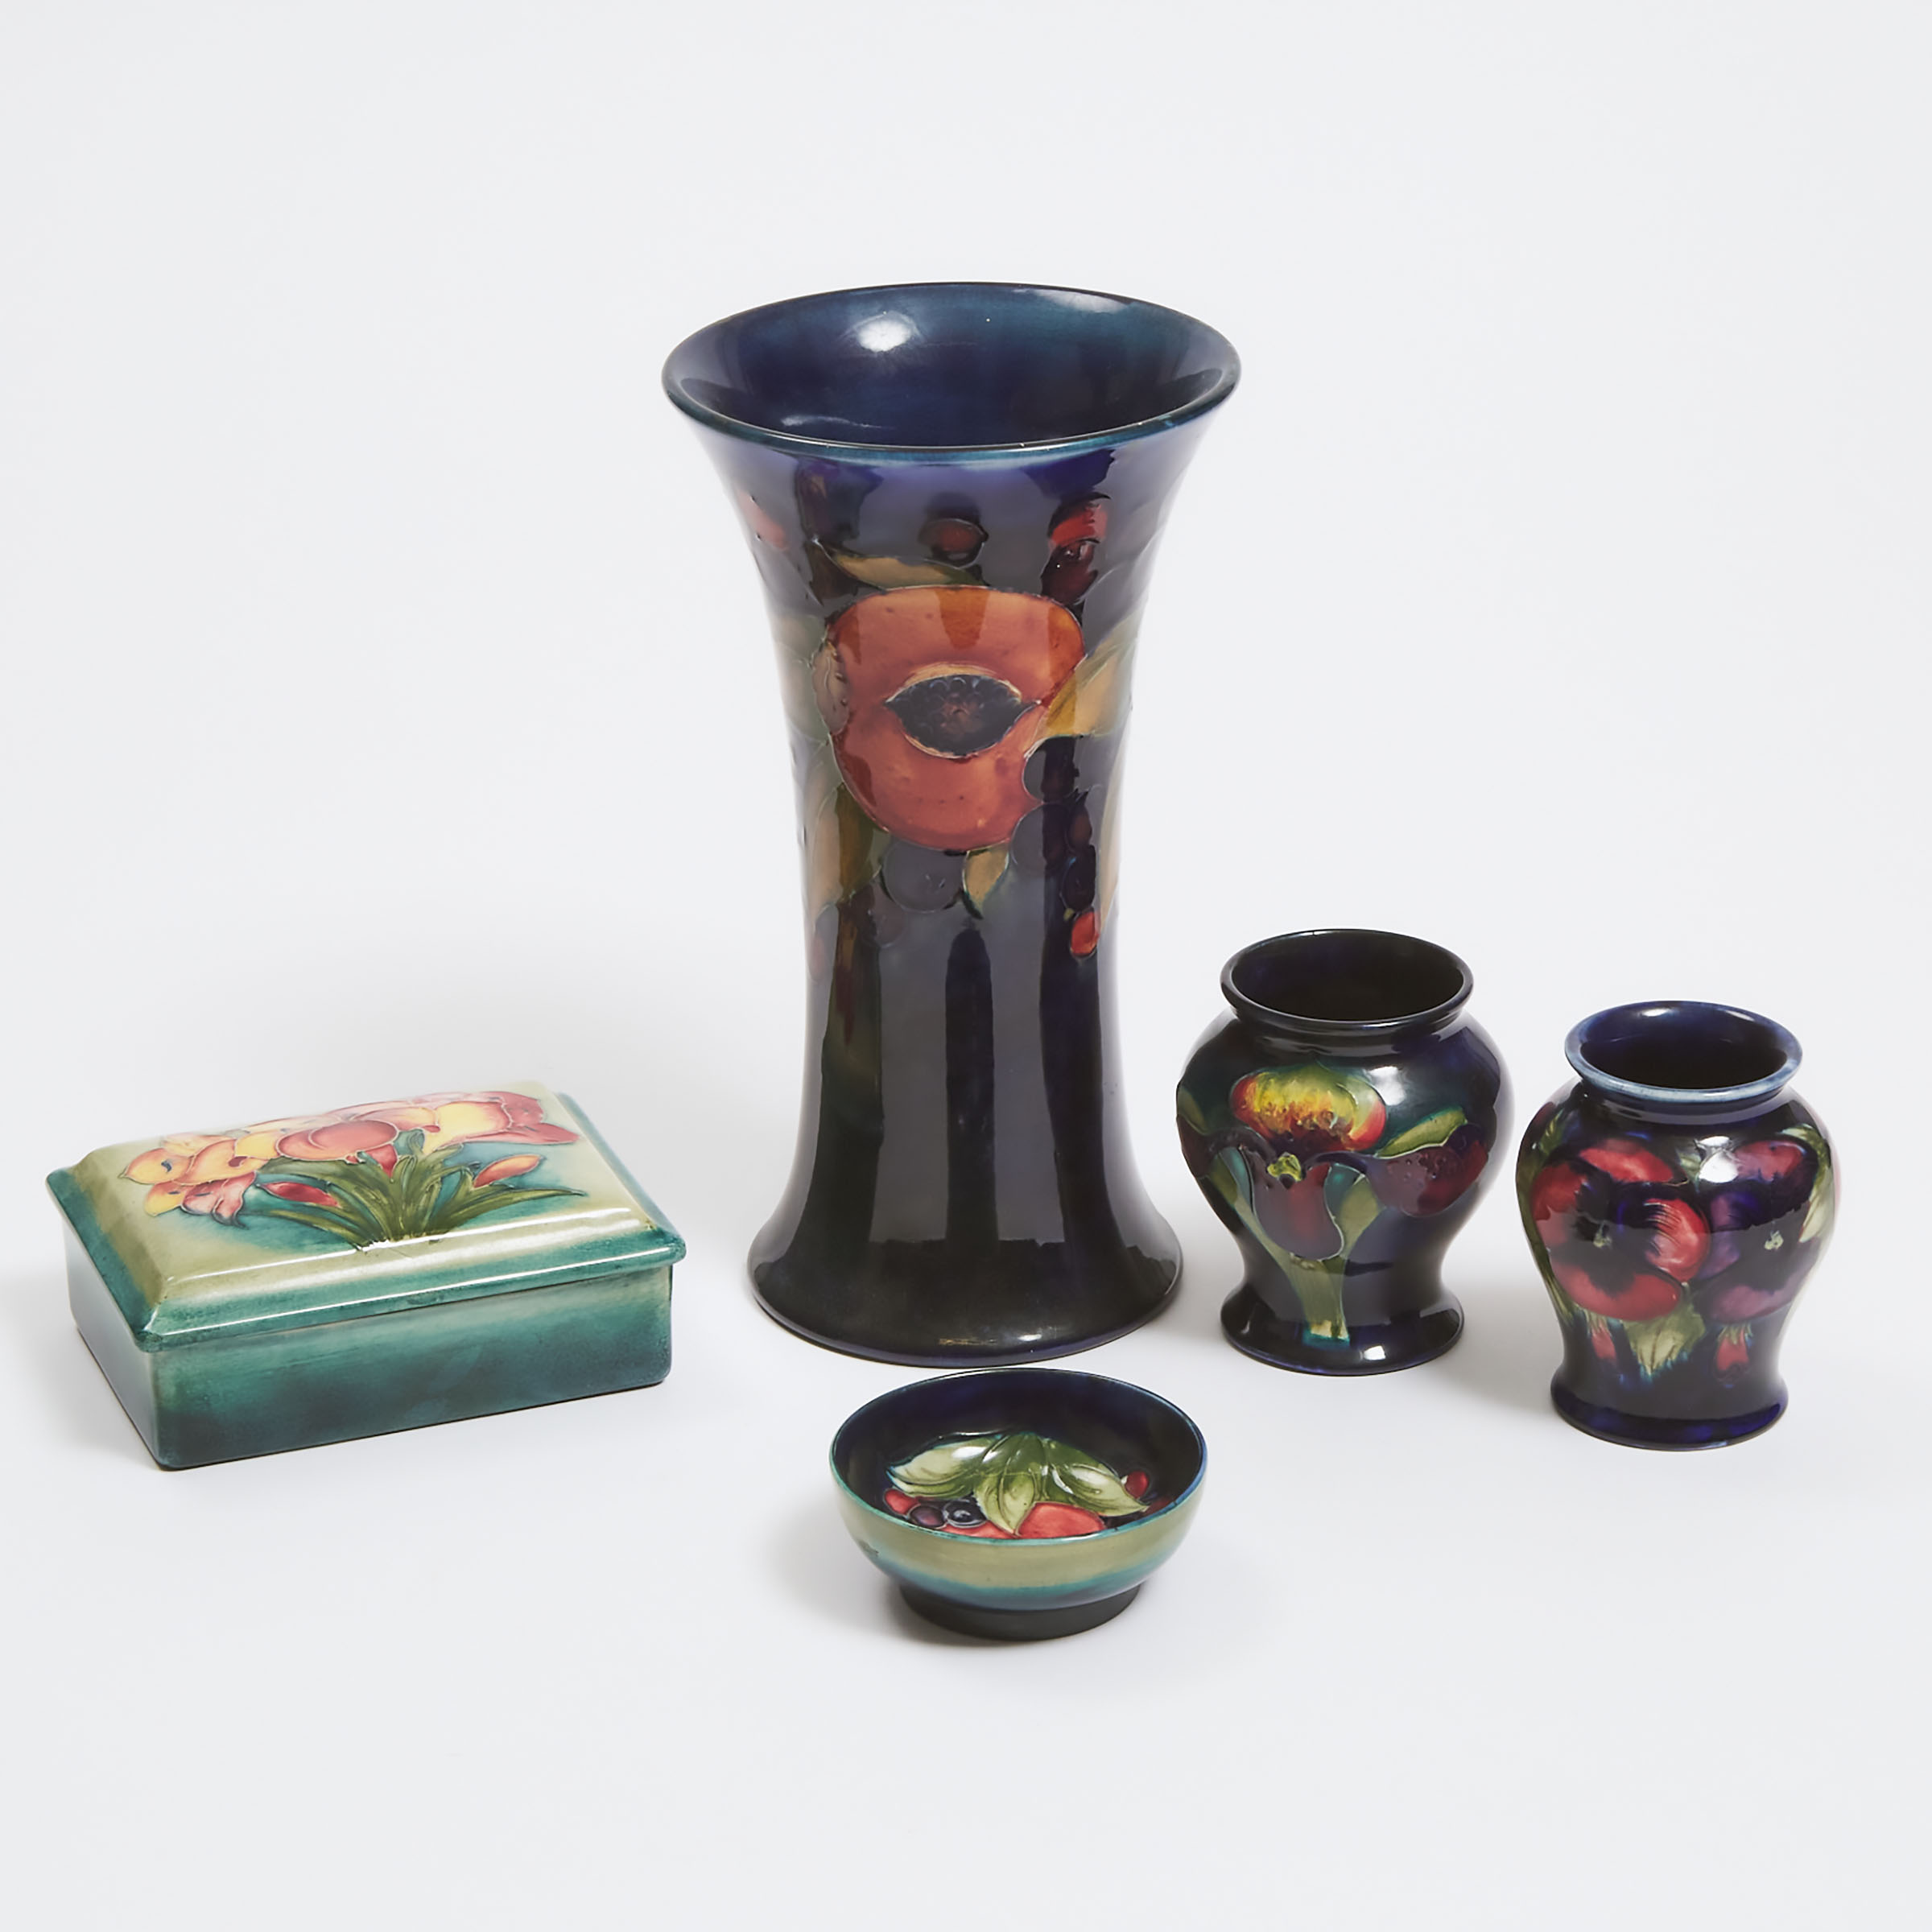 Group of Moorcroft Pottery, mid-20th century